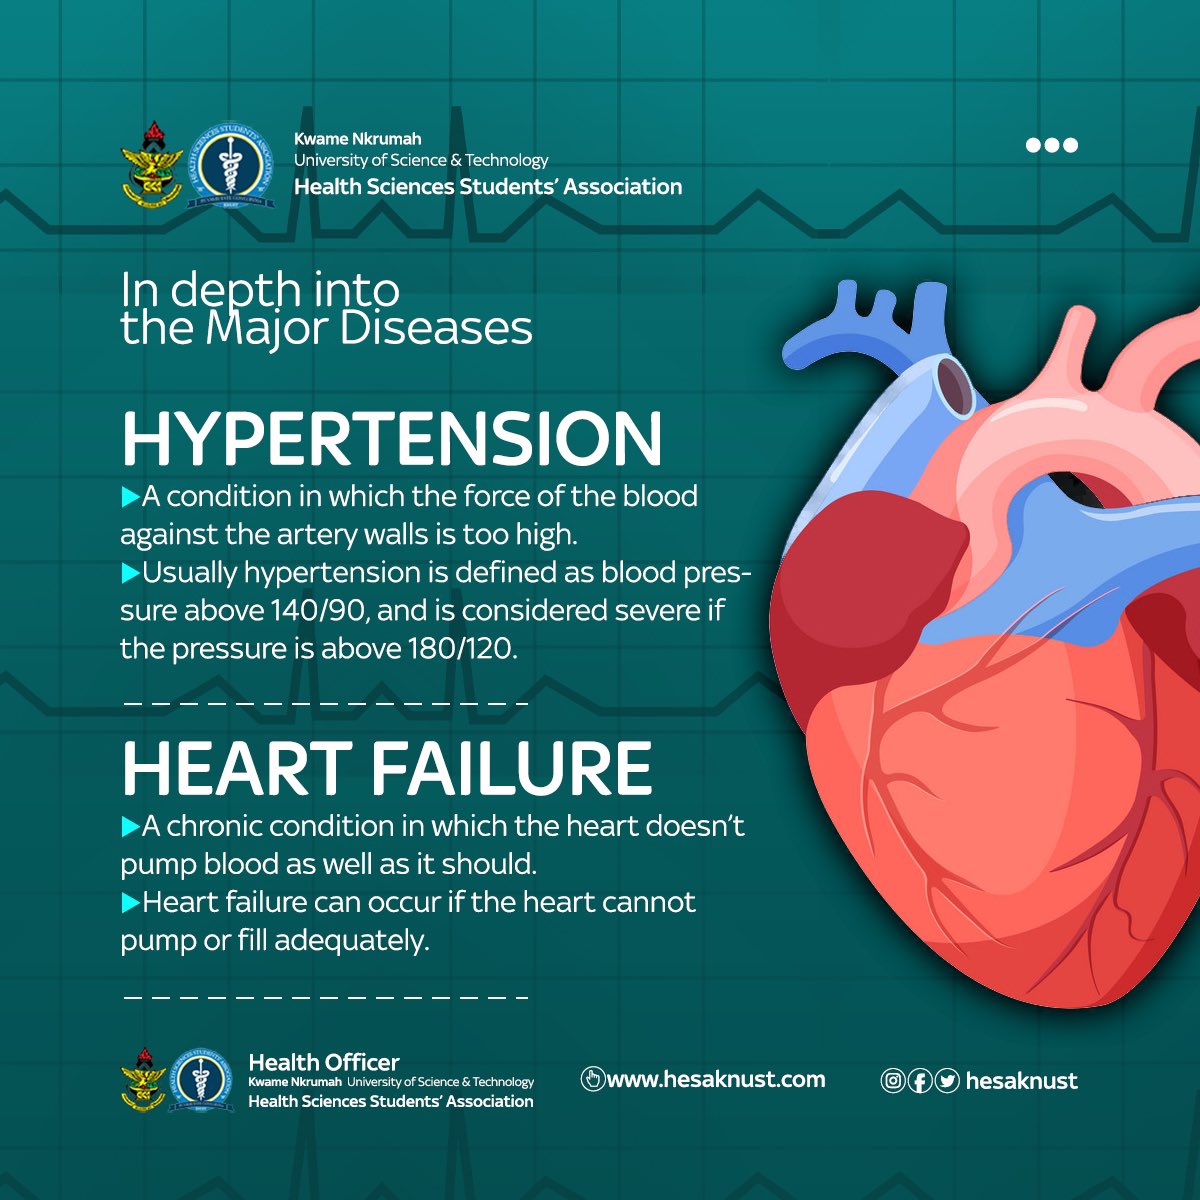 Hypertension and heart failure are two common yet fatal cardiovascular diseases. It is important that you get your BP checked regularly and assessed for any underlying conditions that may place you at a risk. Stay healthy!
#stayhealthystayhappy